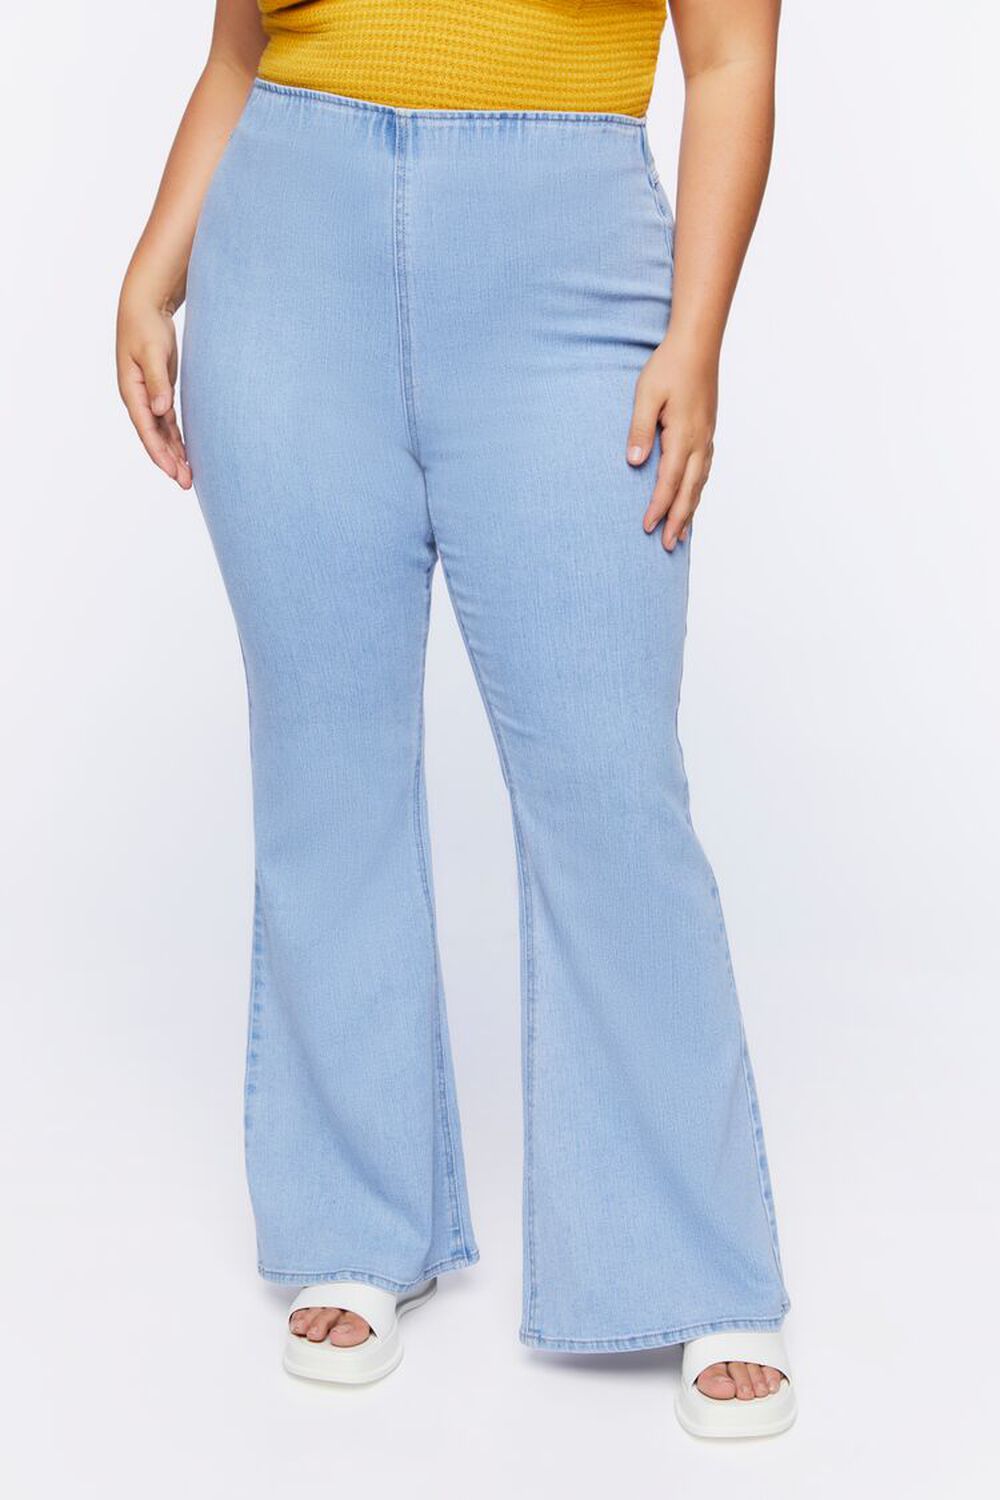 Plus Size High-Rise Flare Jeans, image 2